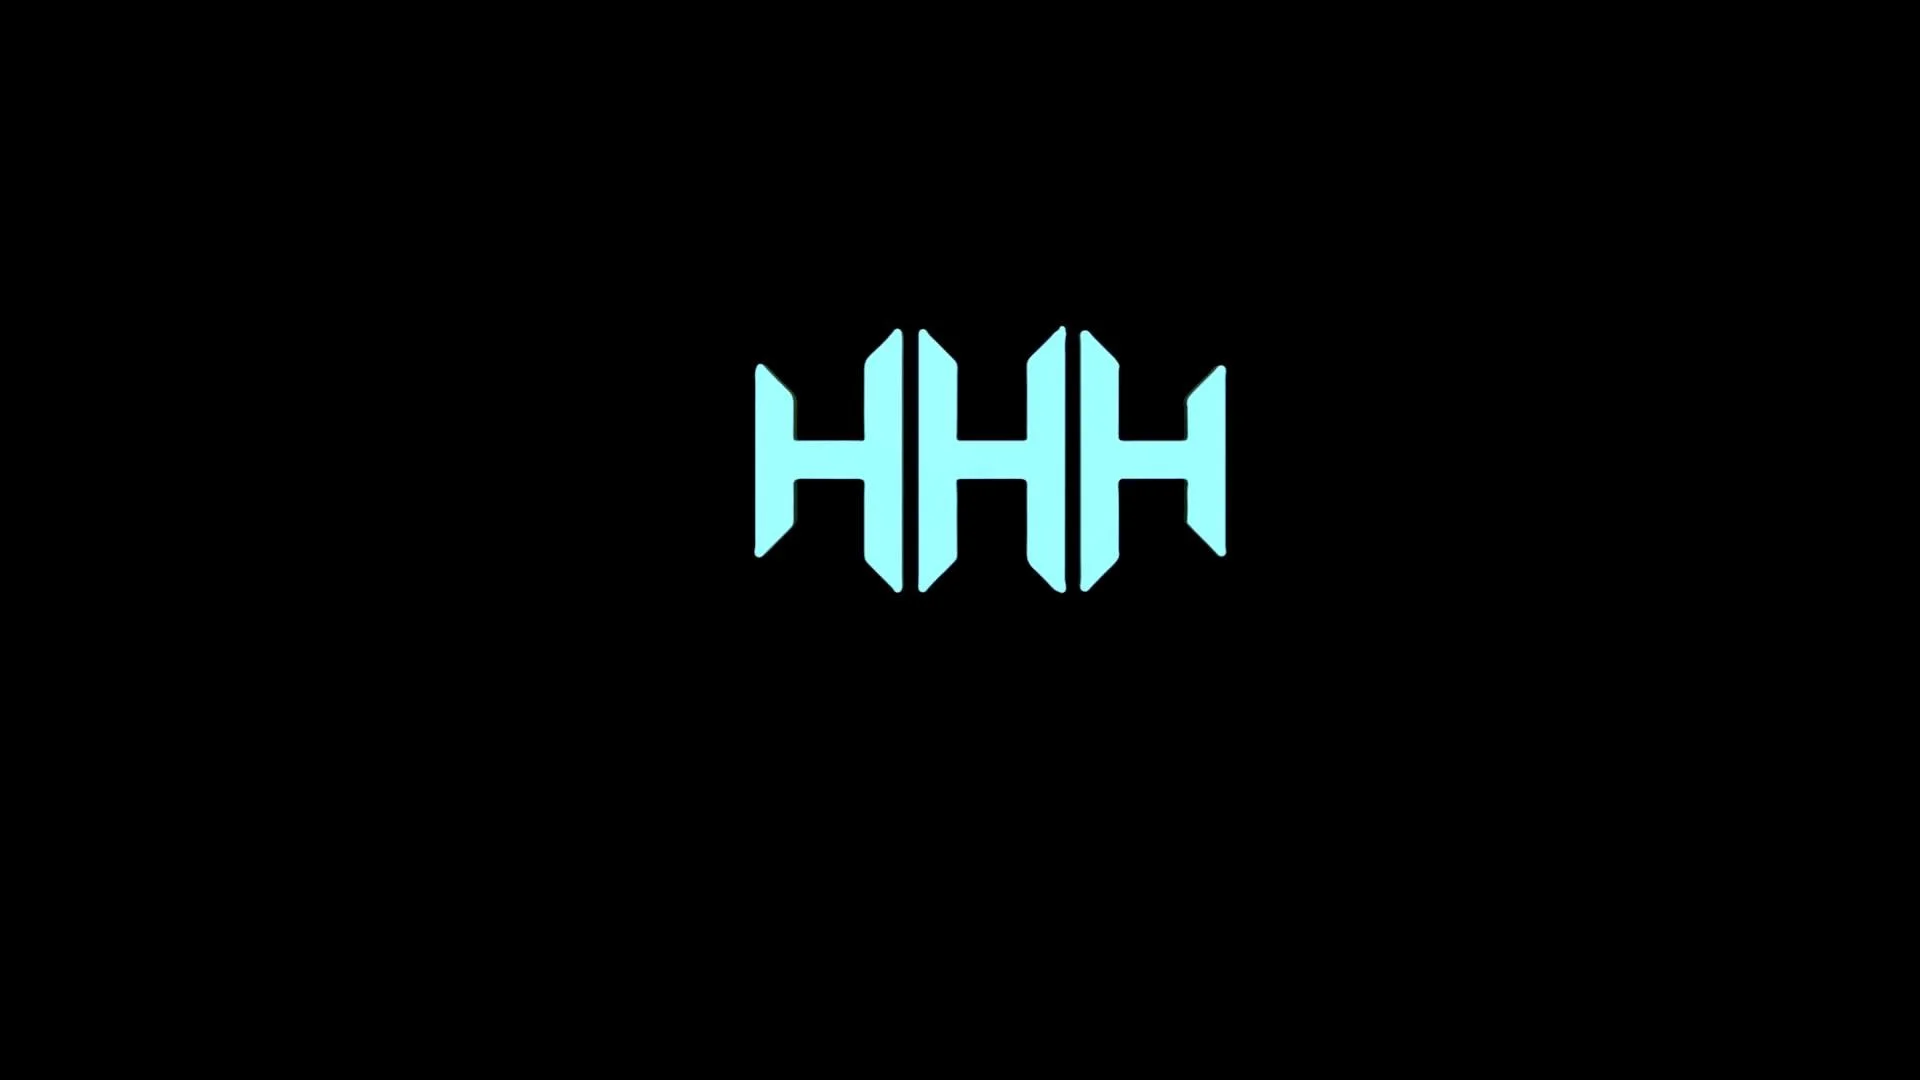 Download Triple H Logo Hd wallpapers to your cell phone – abstract